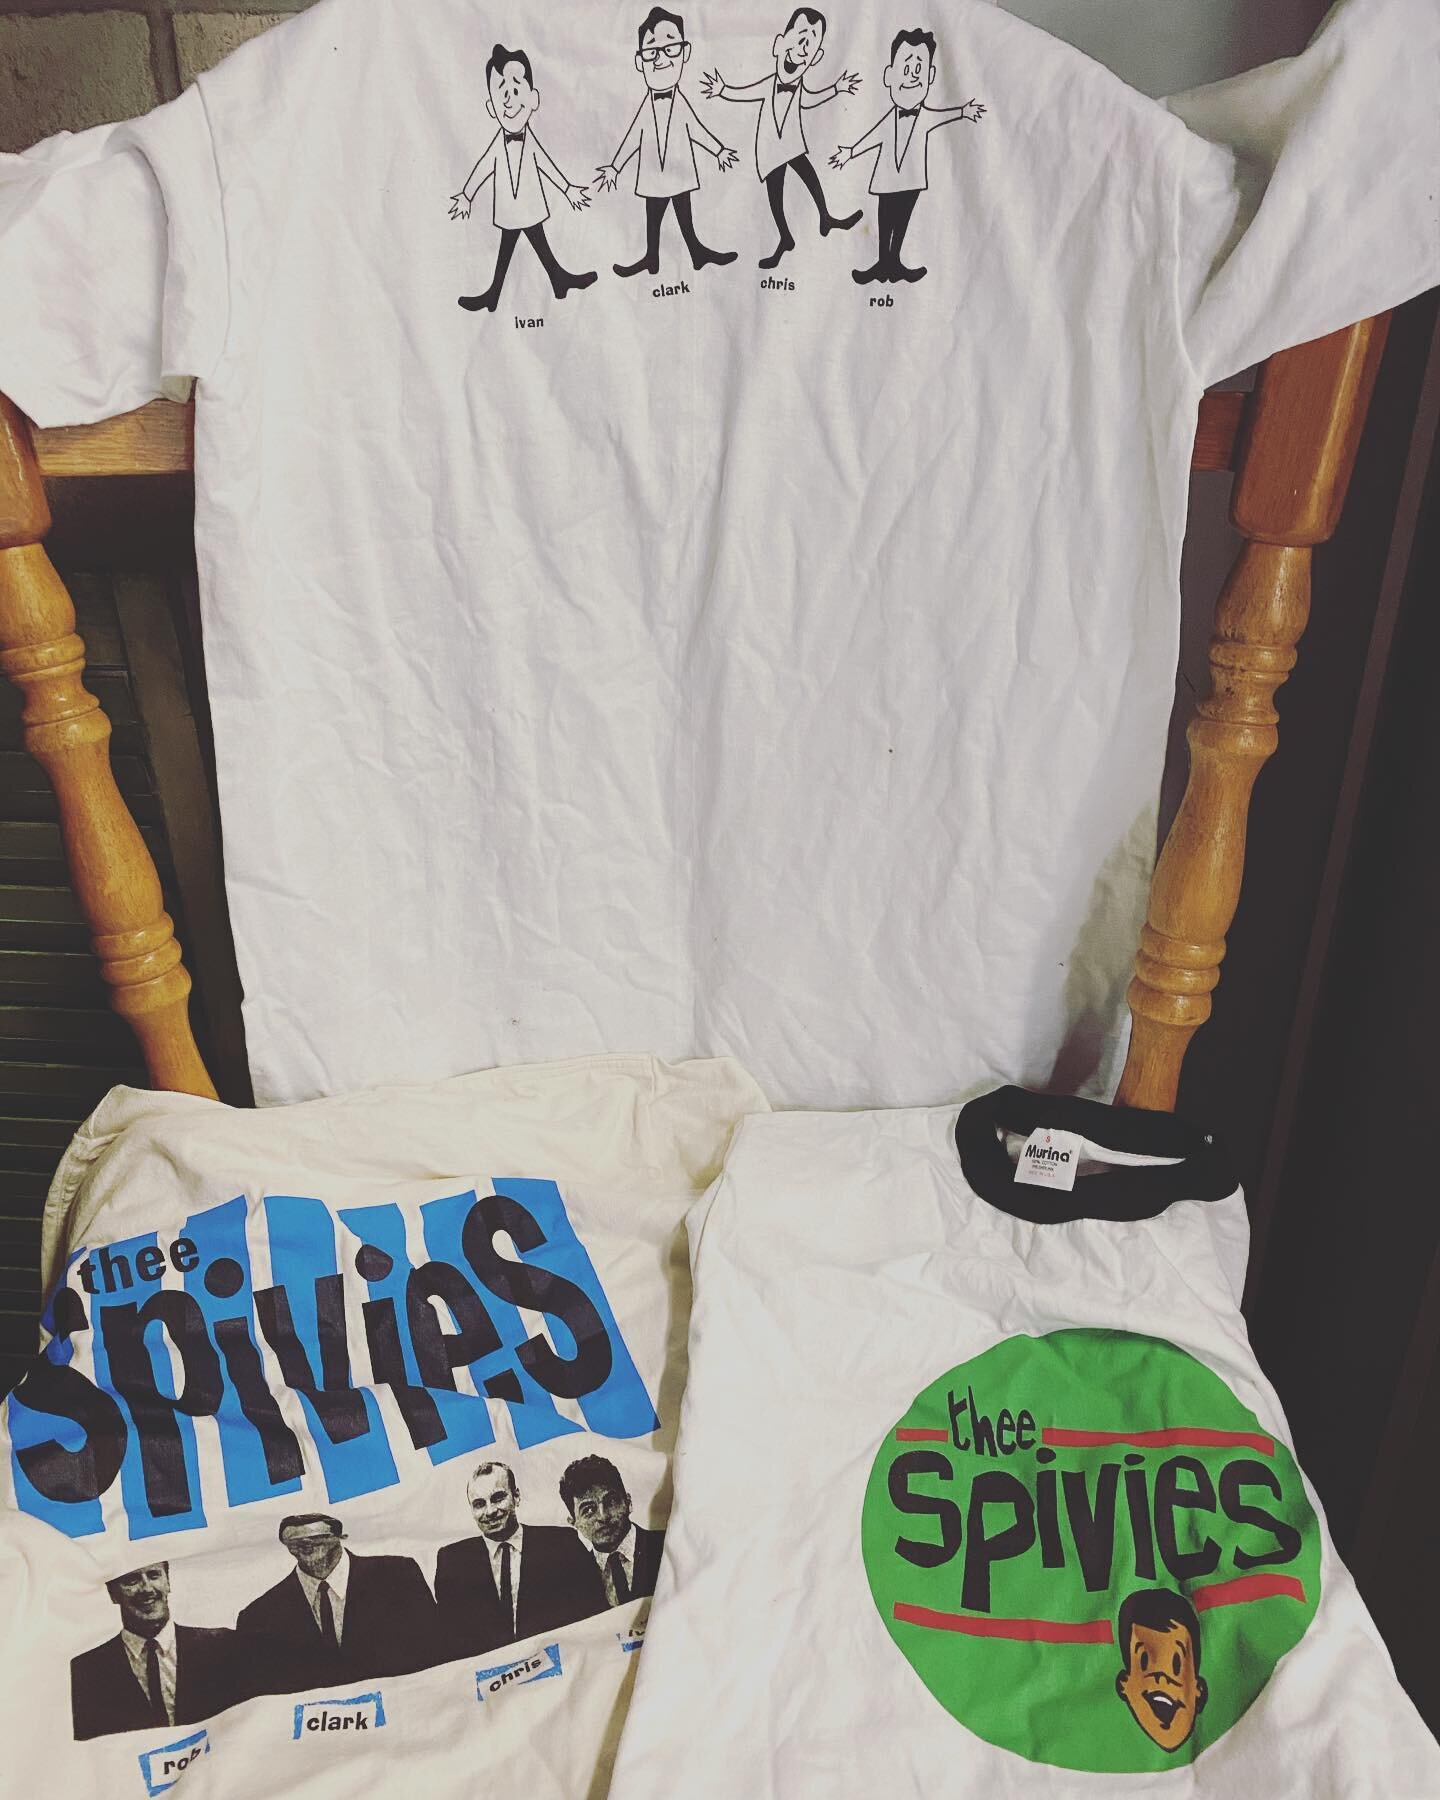 Found some classic t-shirts today! #qualiynevergoesoutofstyle #theespivies #ringertee